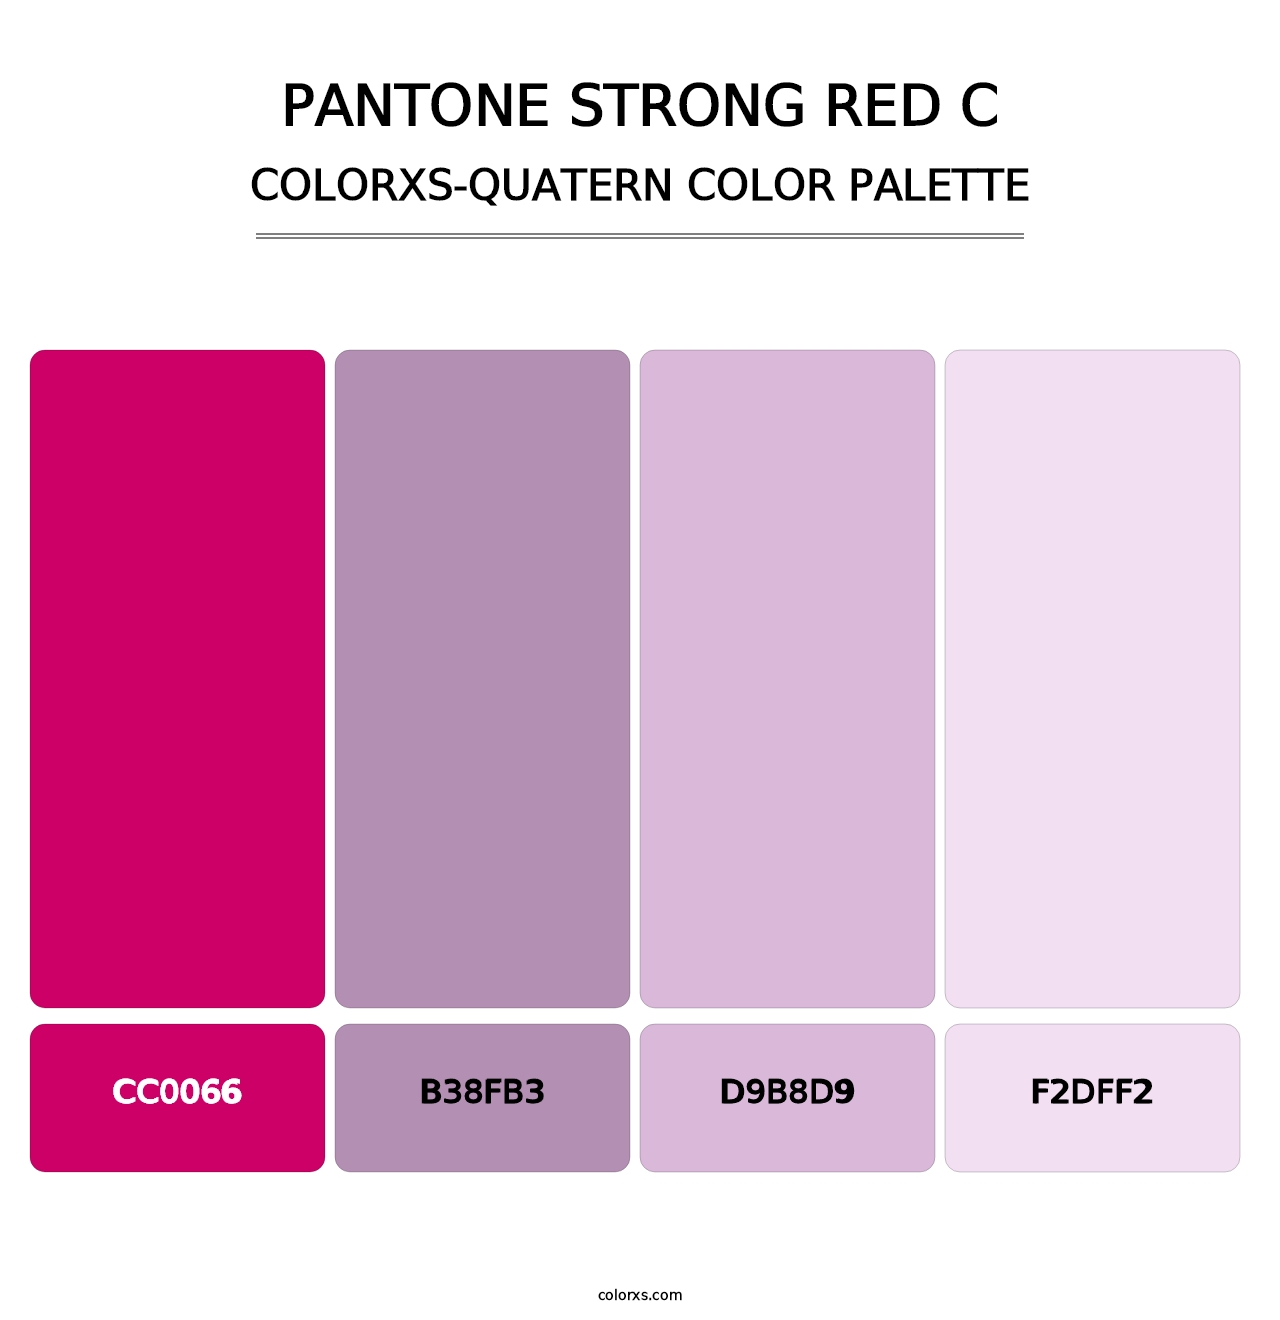 PANTONE Strong Red C - Colorxs Quatern Palette